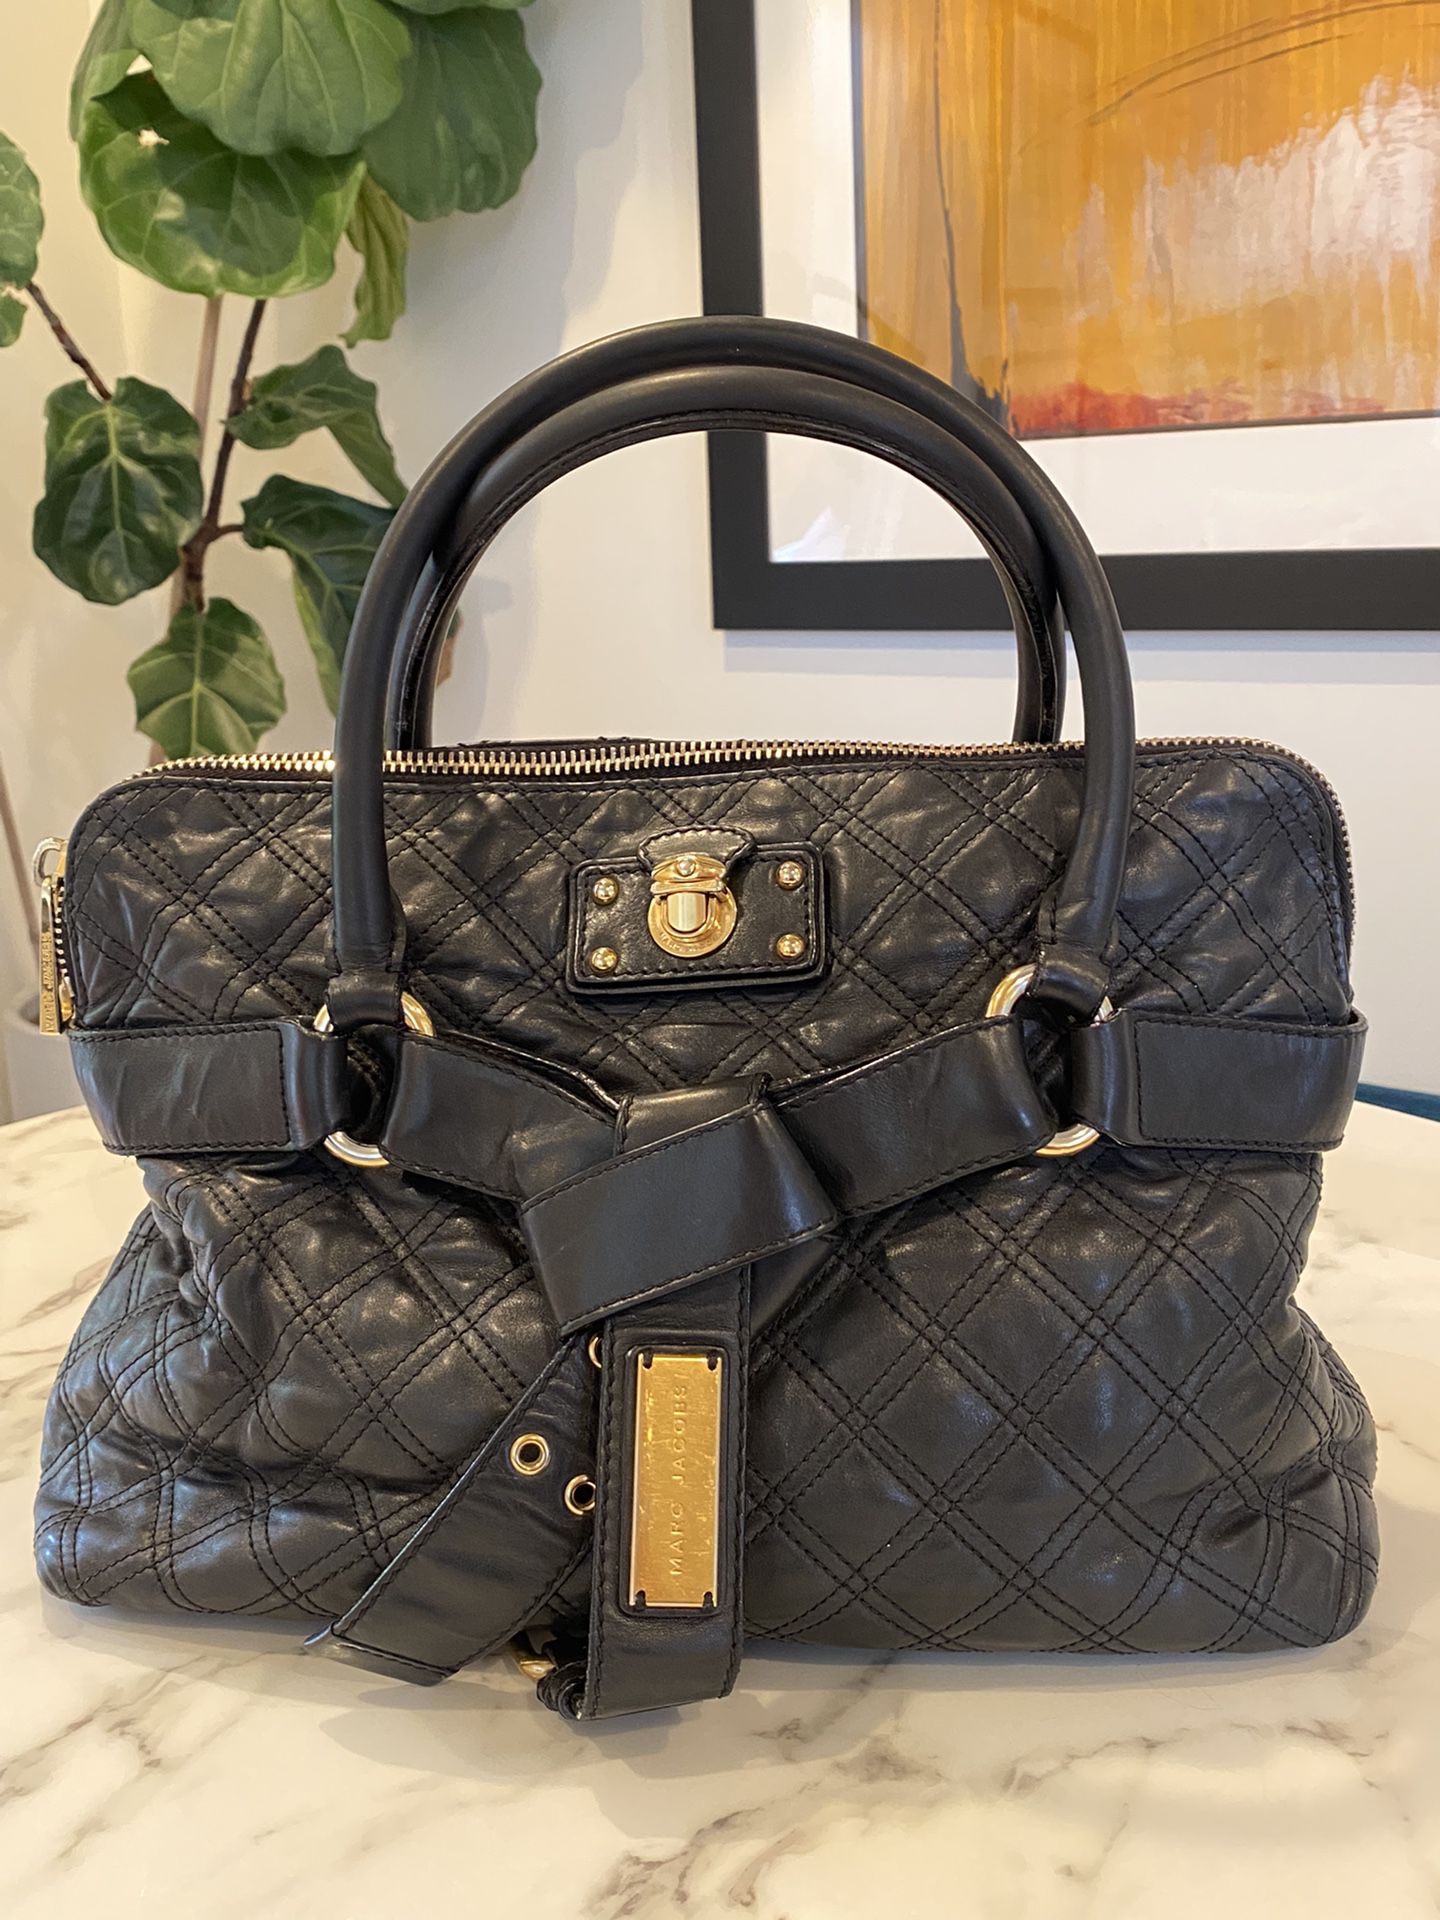 Authentic MARC JACOBS Calfskin Quilted Satchel Tote bag in Black